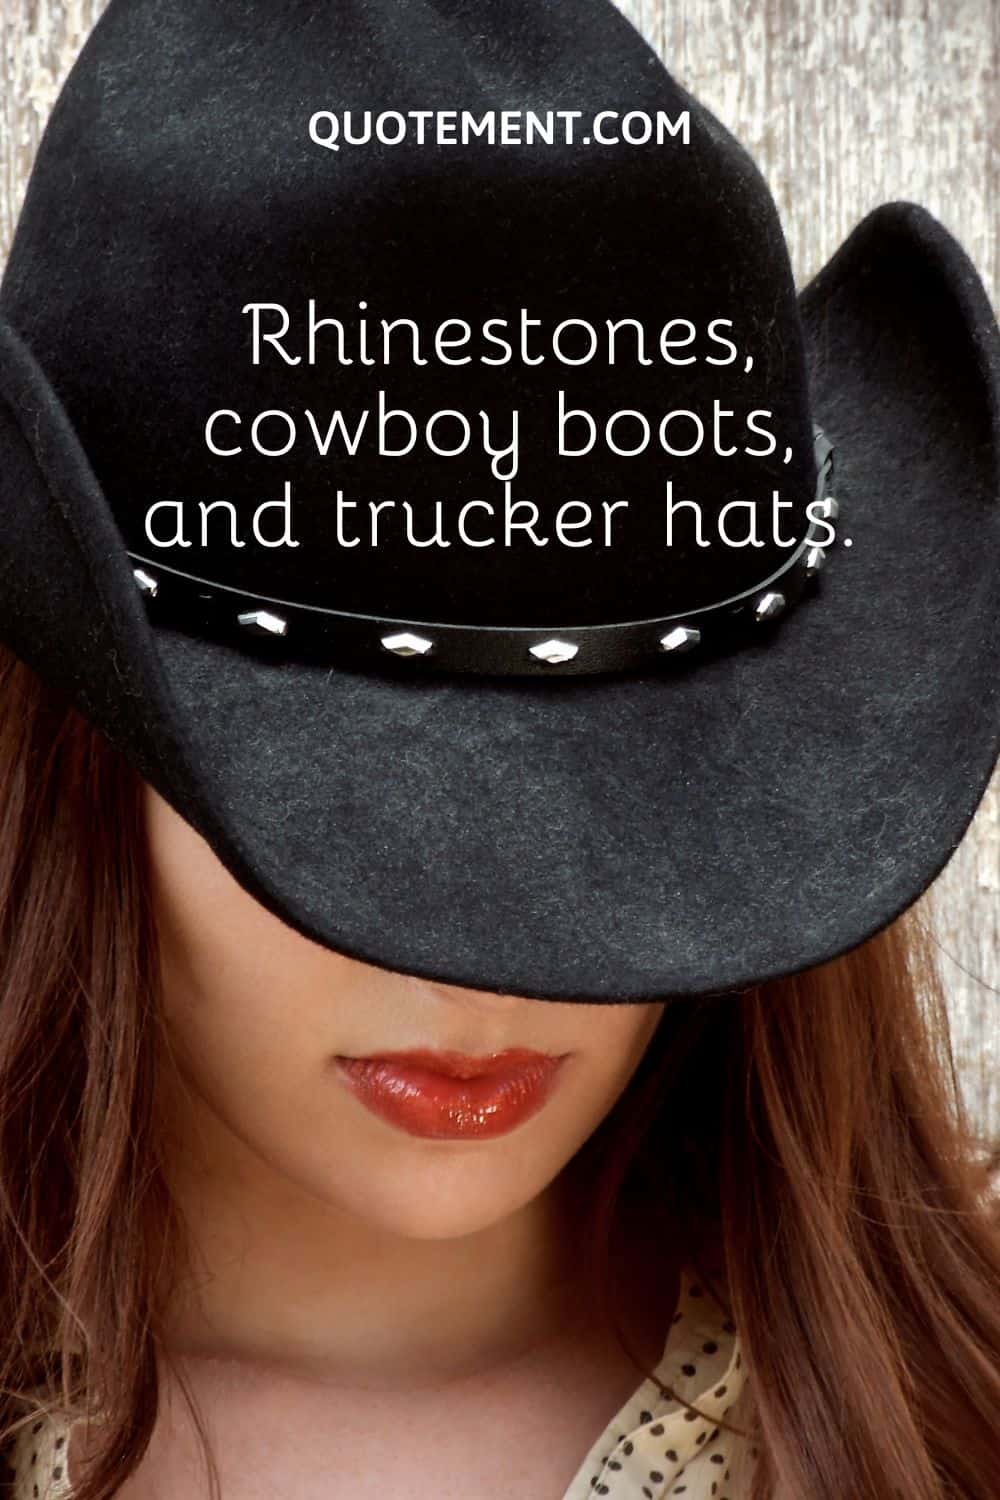 a young woman's head wearing a cowgirl hat with rhinestones
